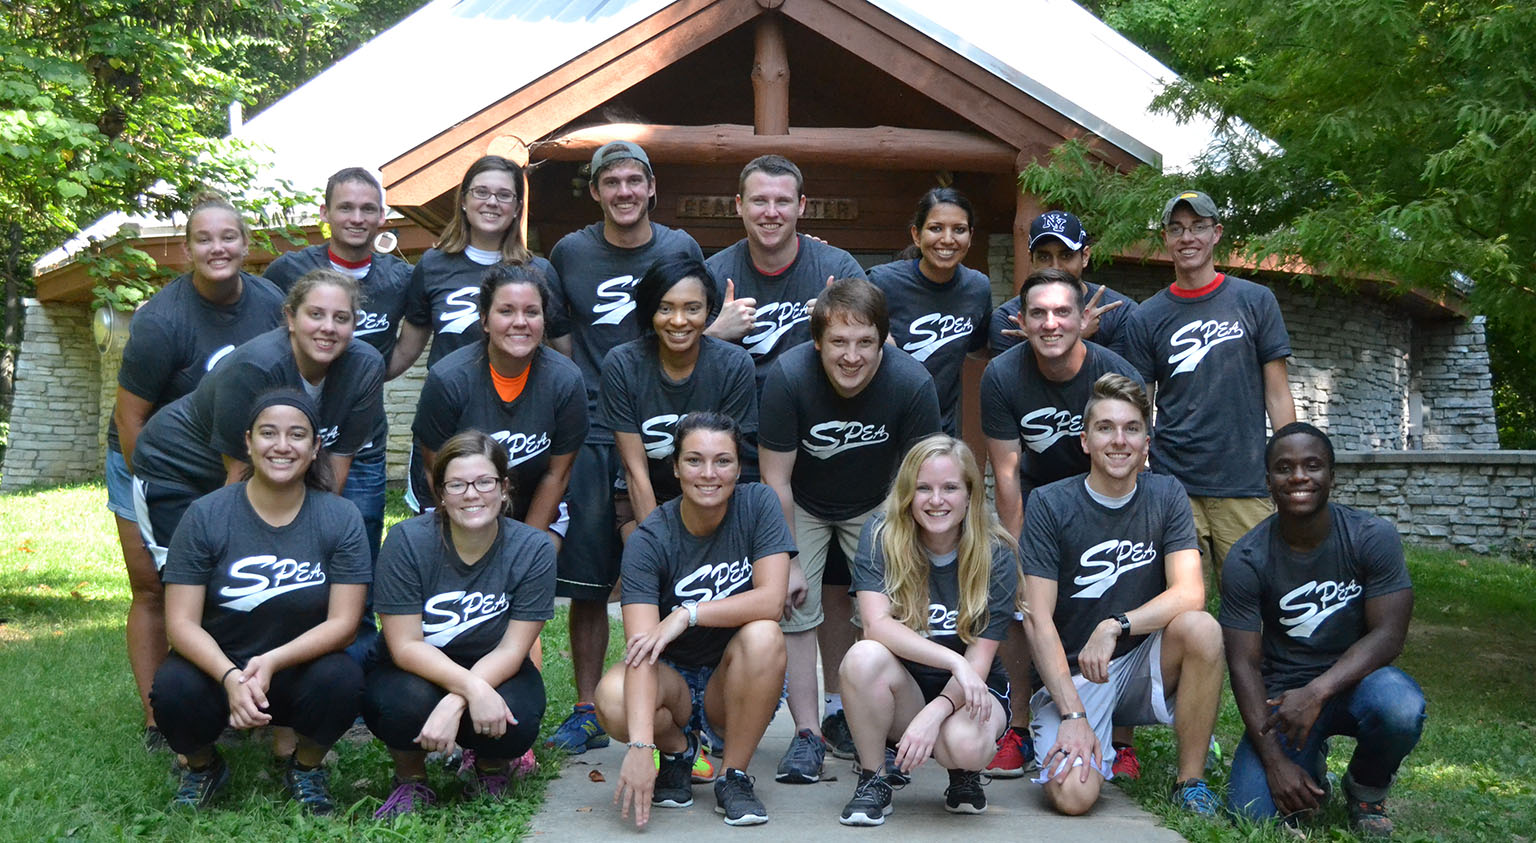 A SPEA student organization poses as a group in front of a cabin. 